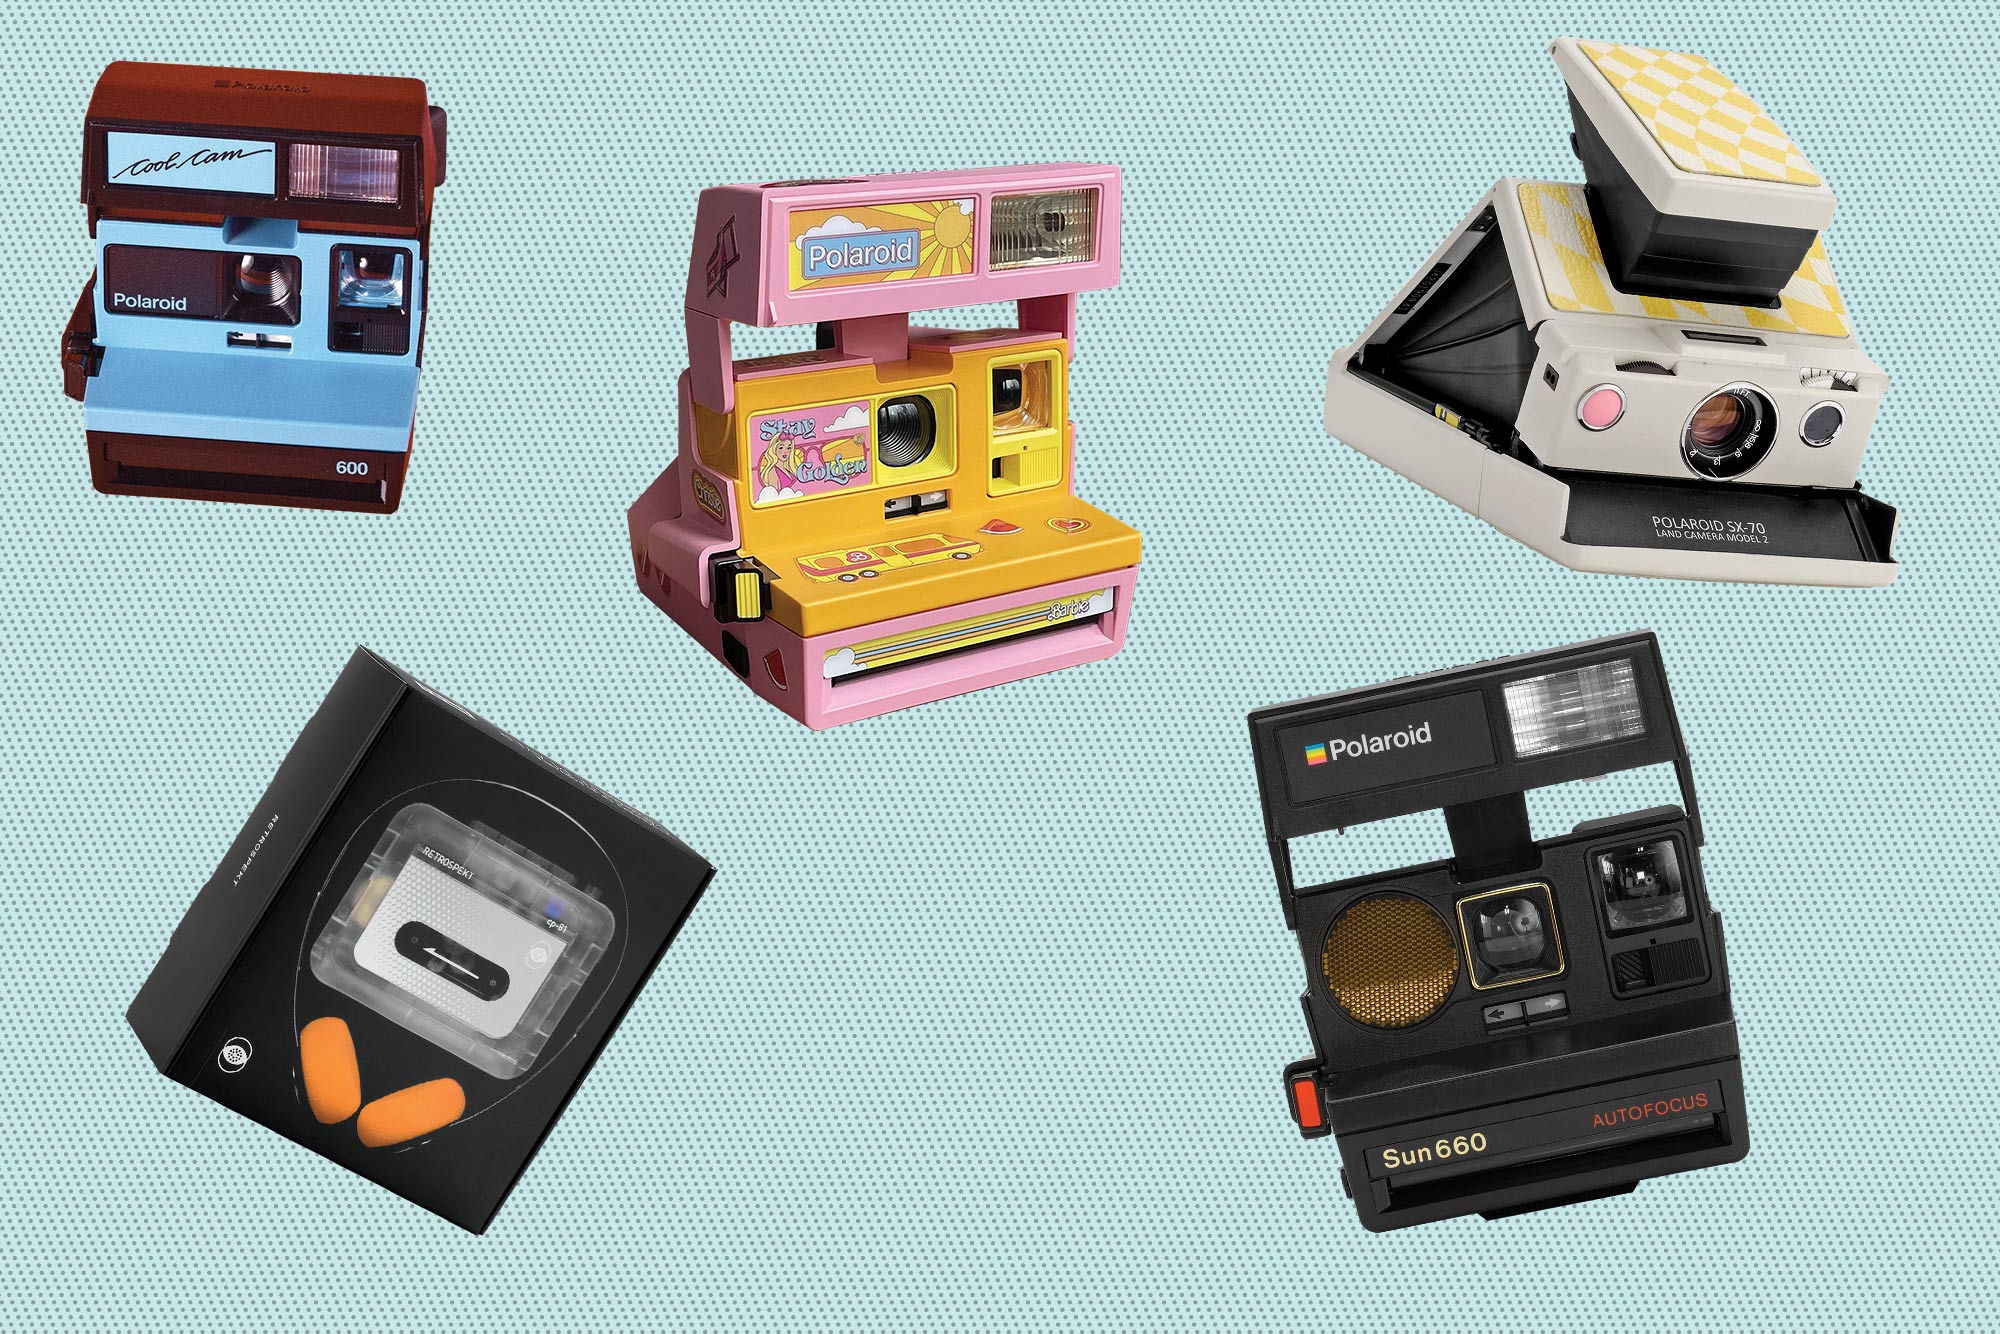 Retro Tech: Gadget Gifts Go Back to the Future  Gadgets technology  awesome, Cordless phone, Retro phone